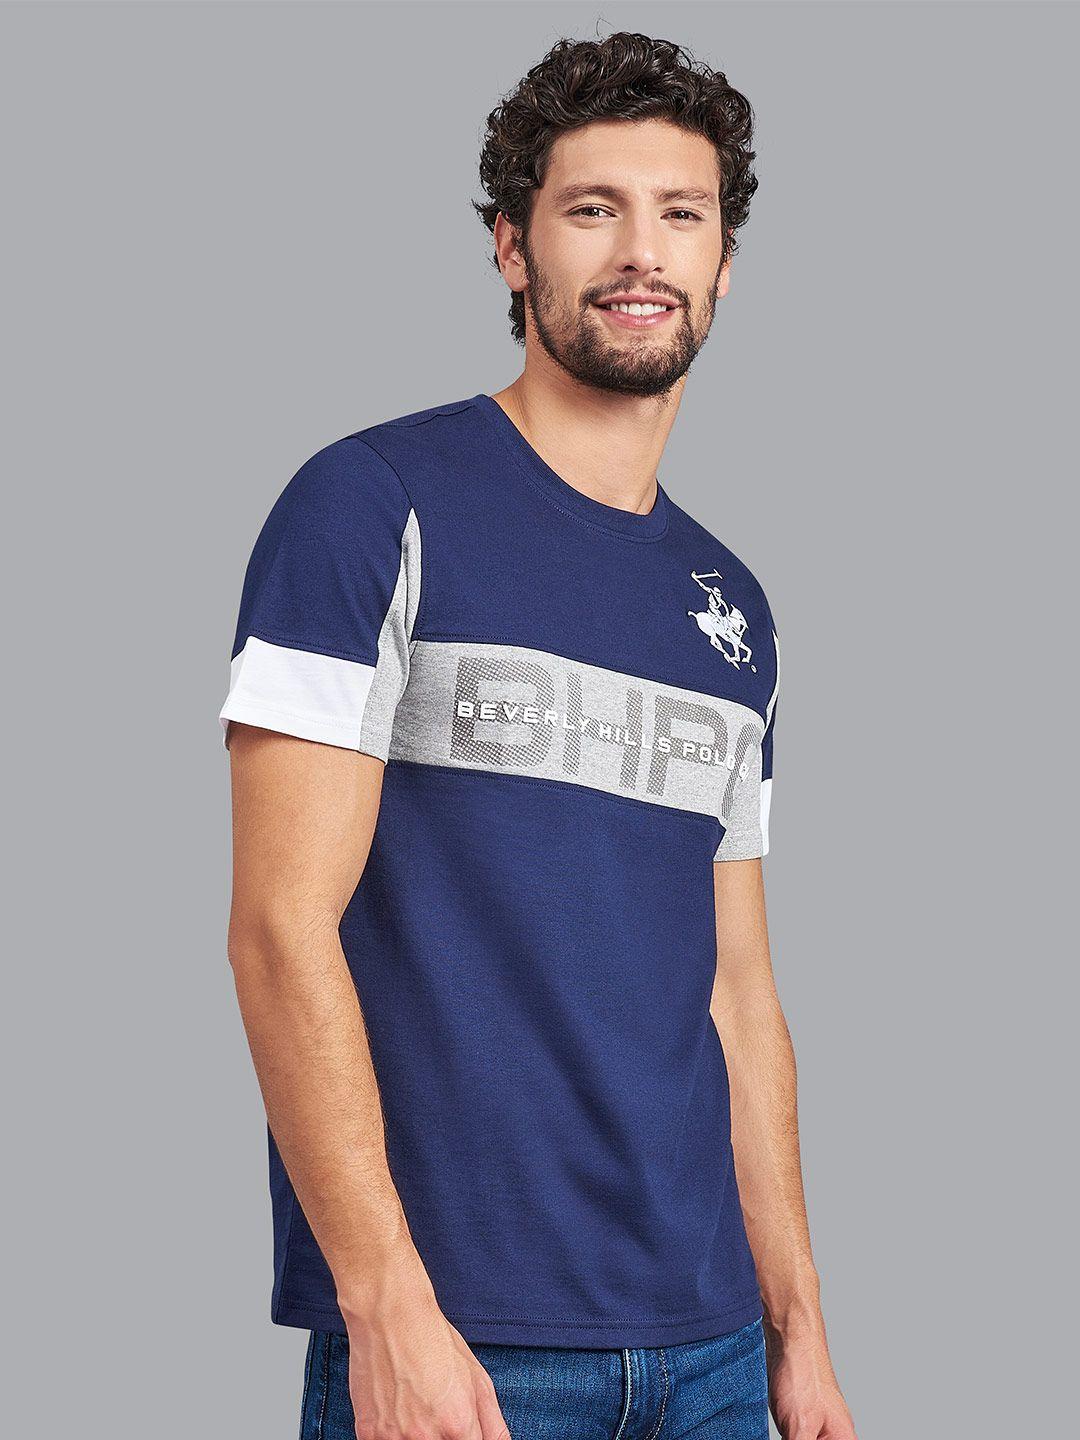 beverly hills polo club men navy blue & grey typography printed cotton t-shirt